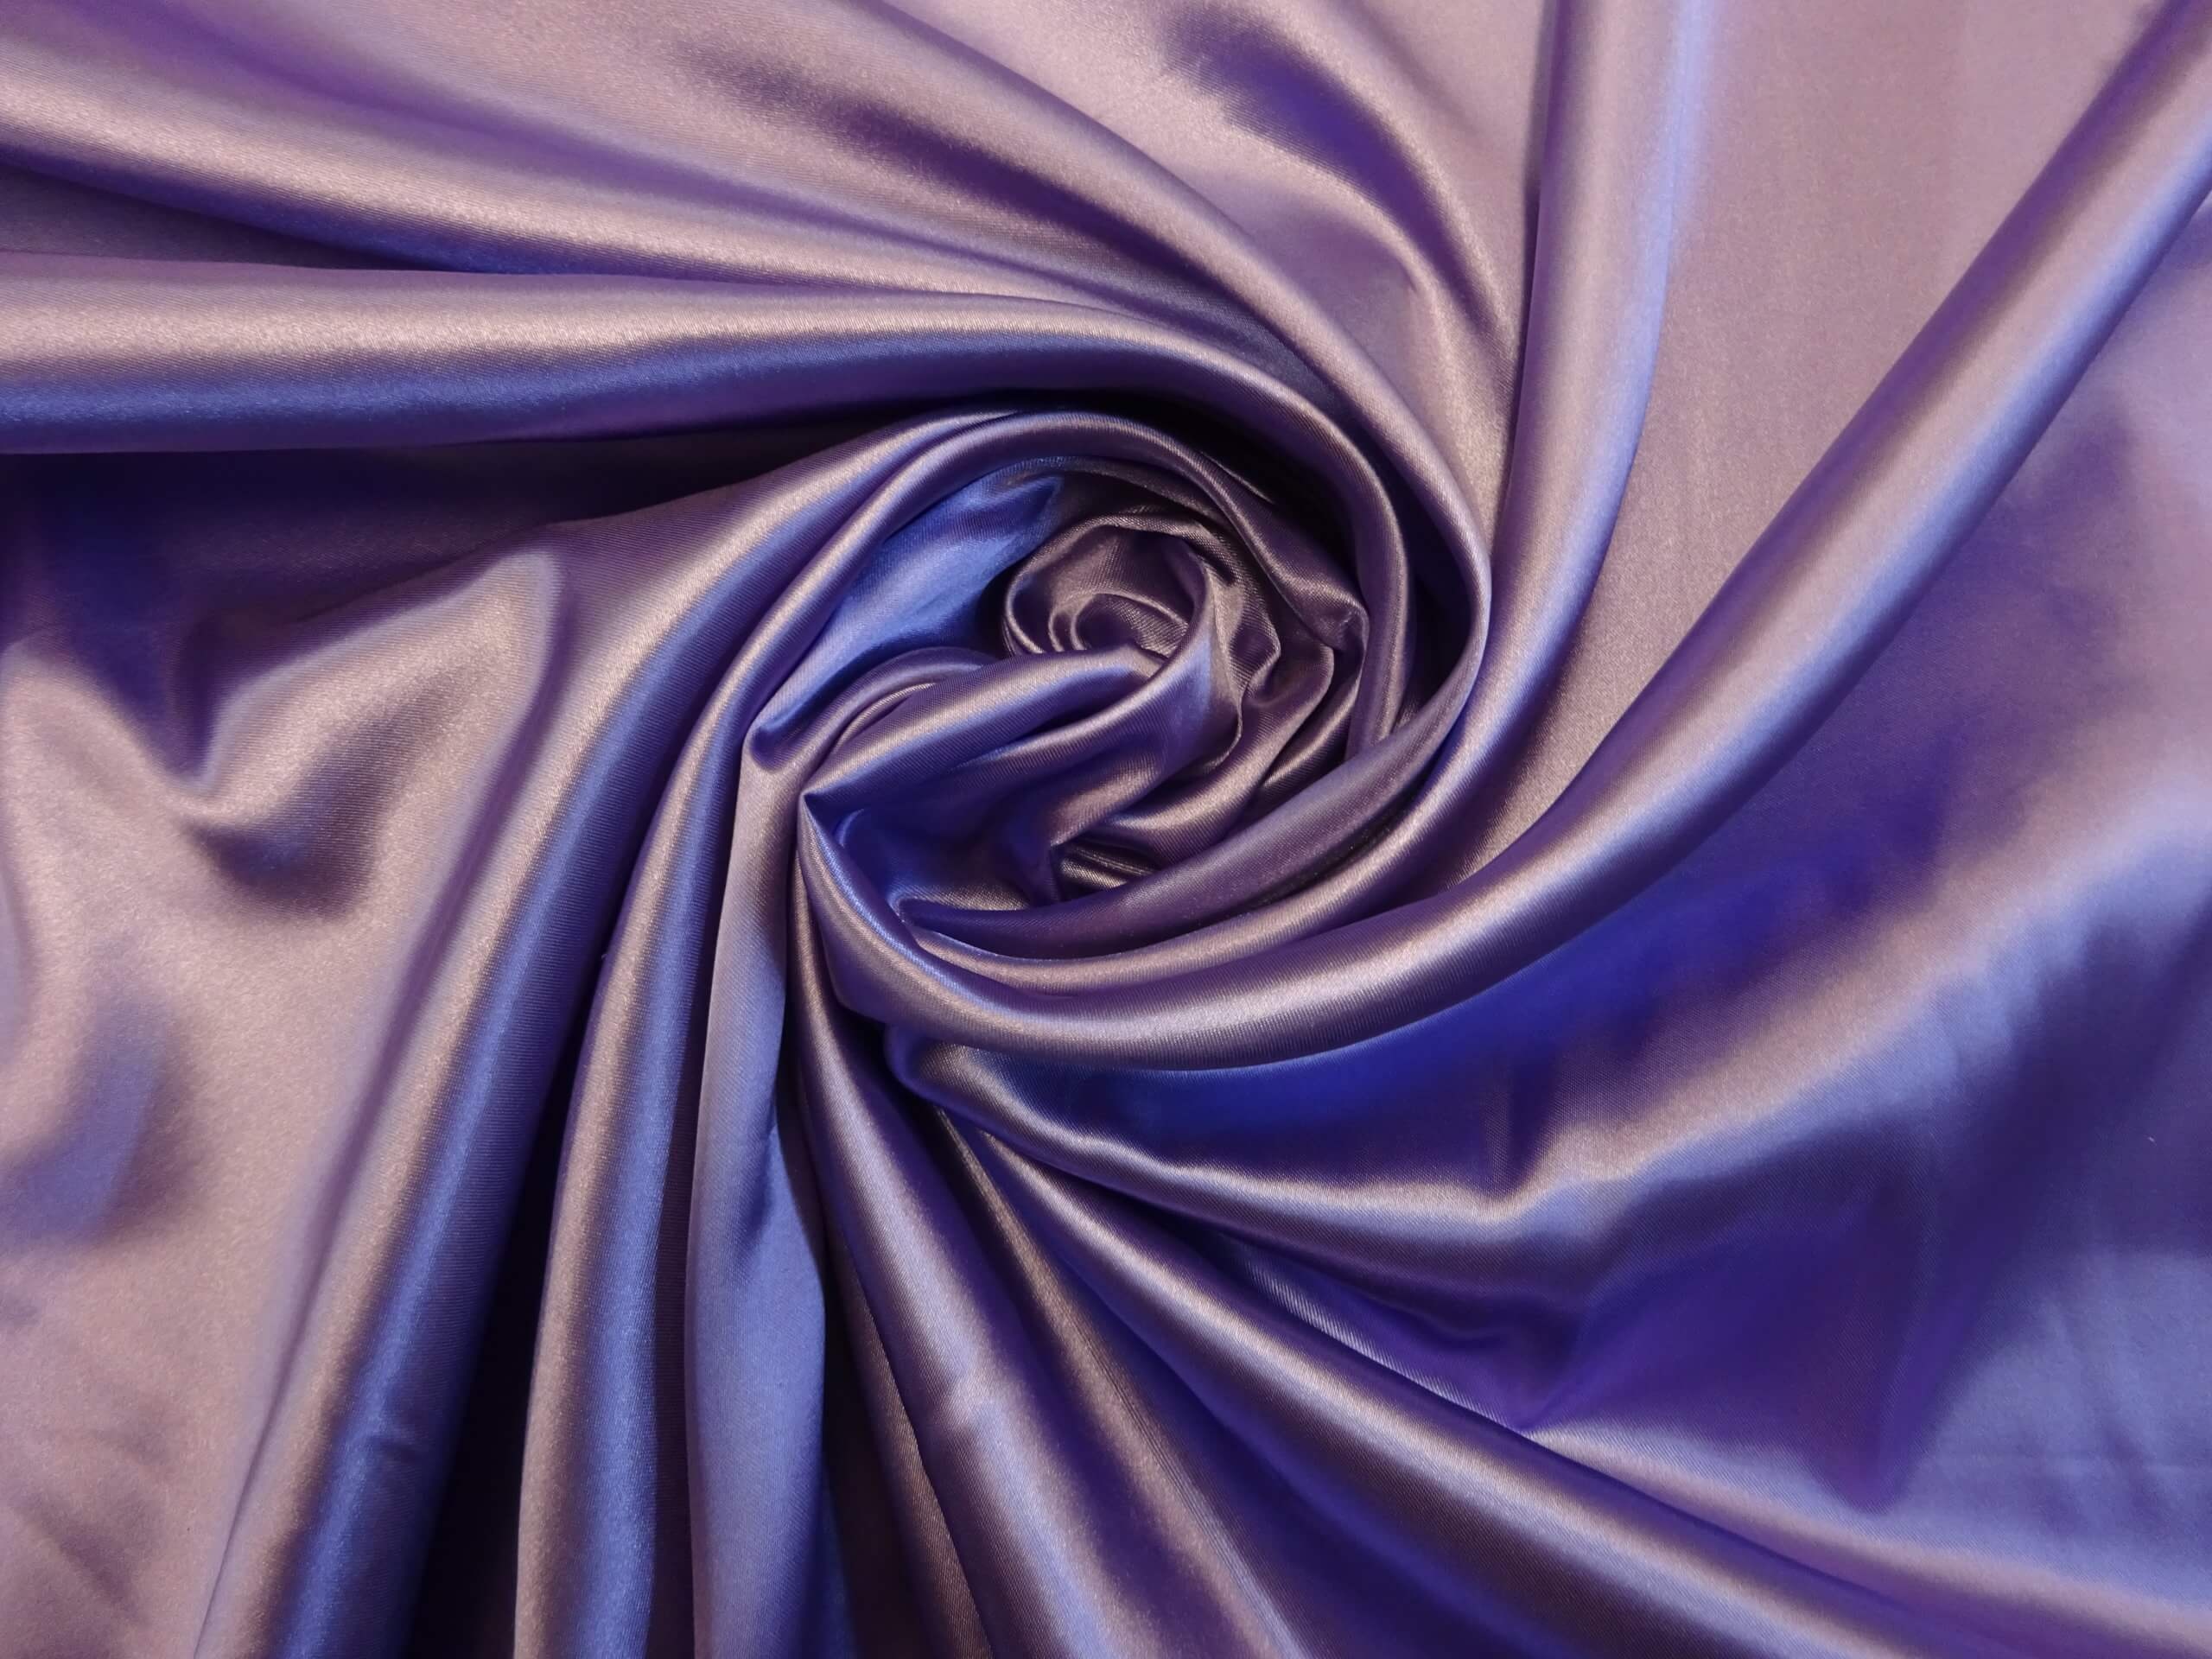 Affordable and luxurious, Silky fabric, Soft to the touch, Quality material, 2560x1920 HD Desktop